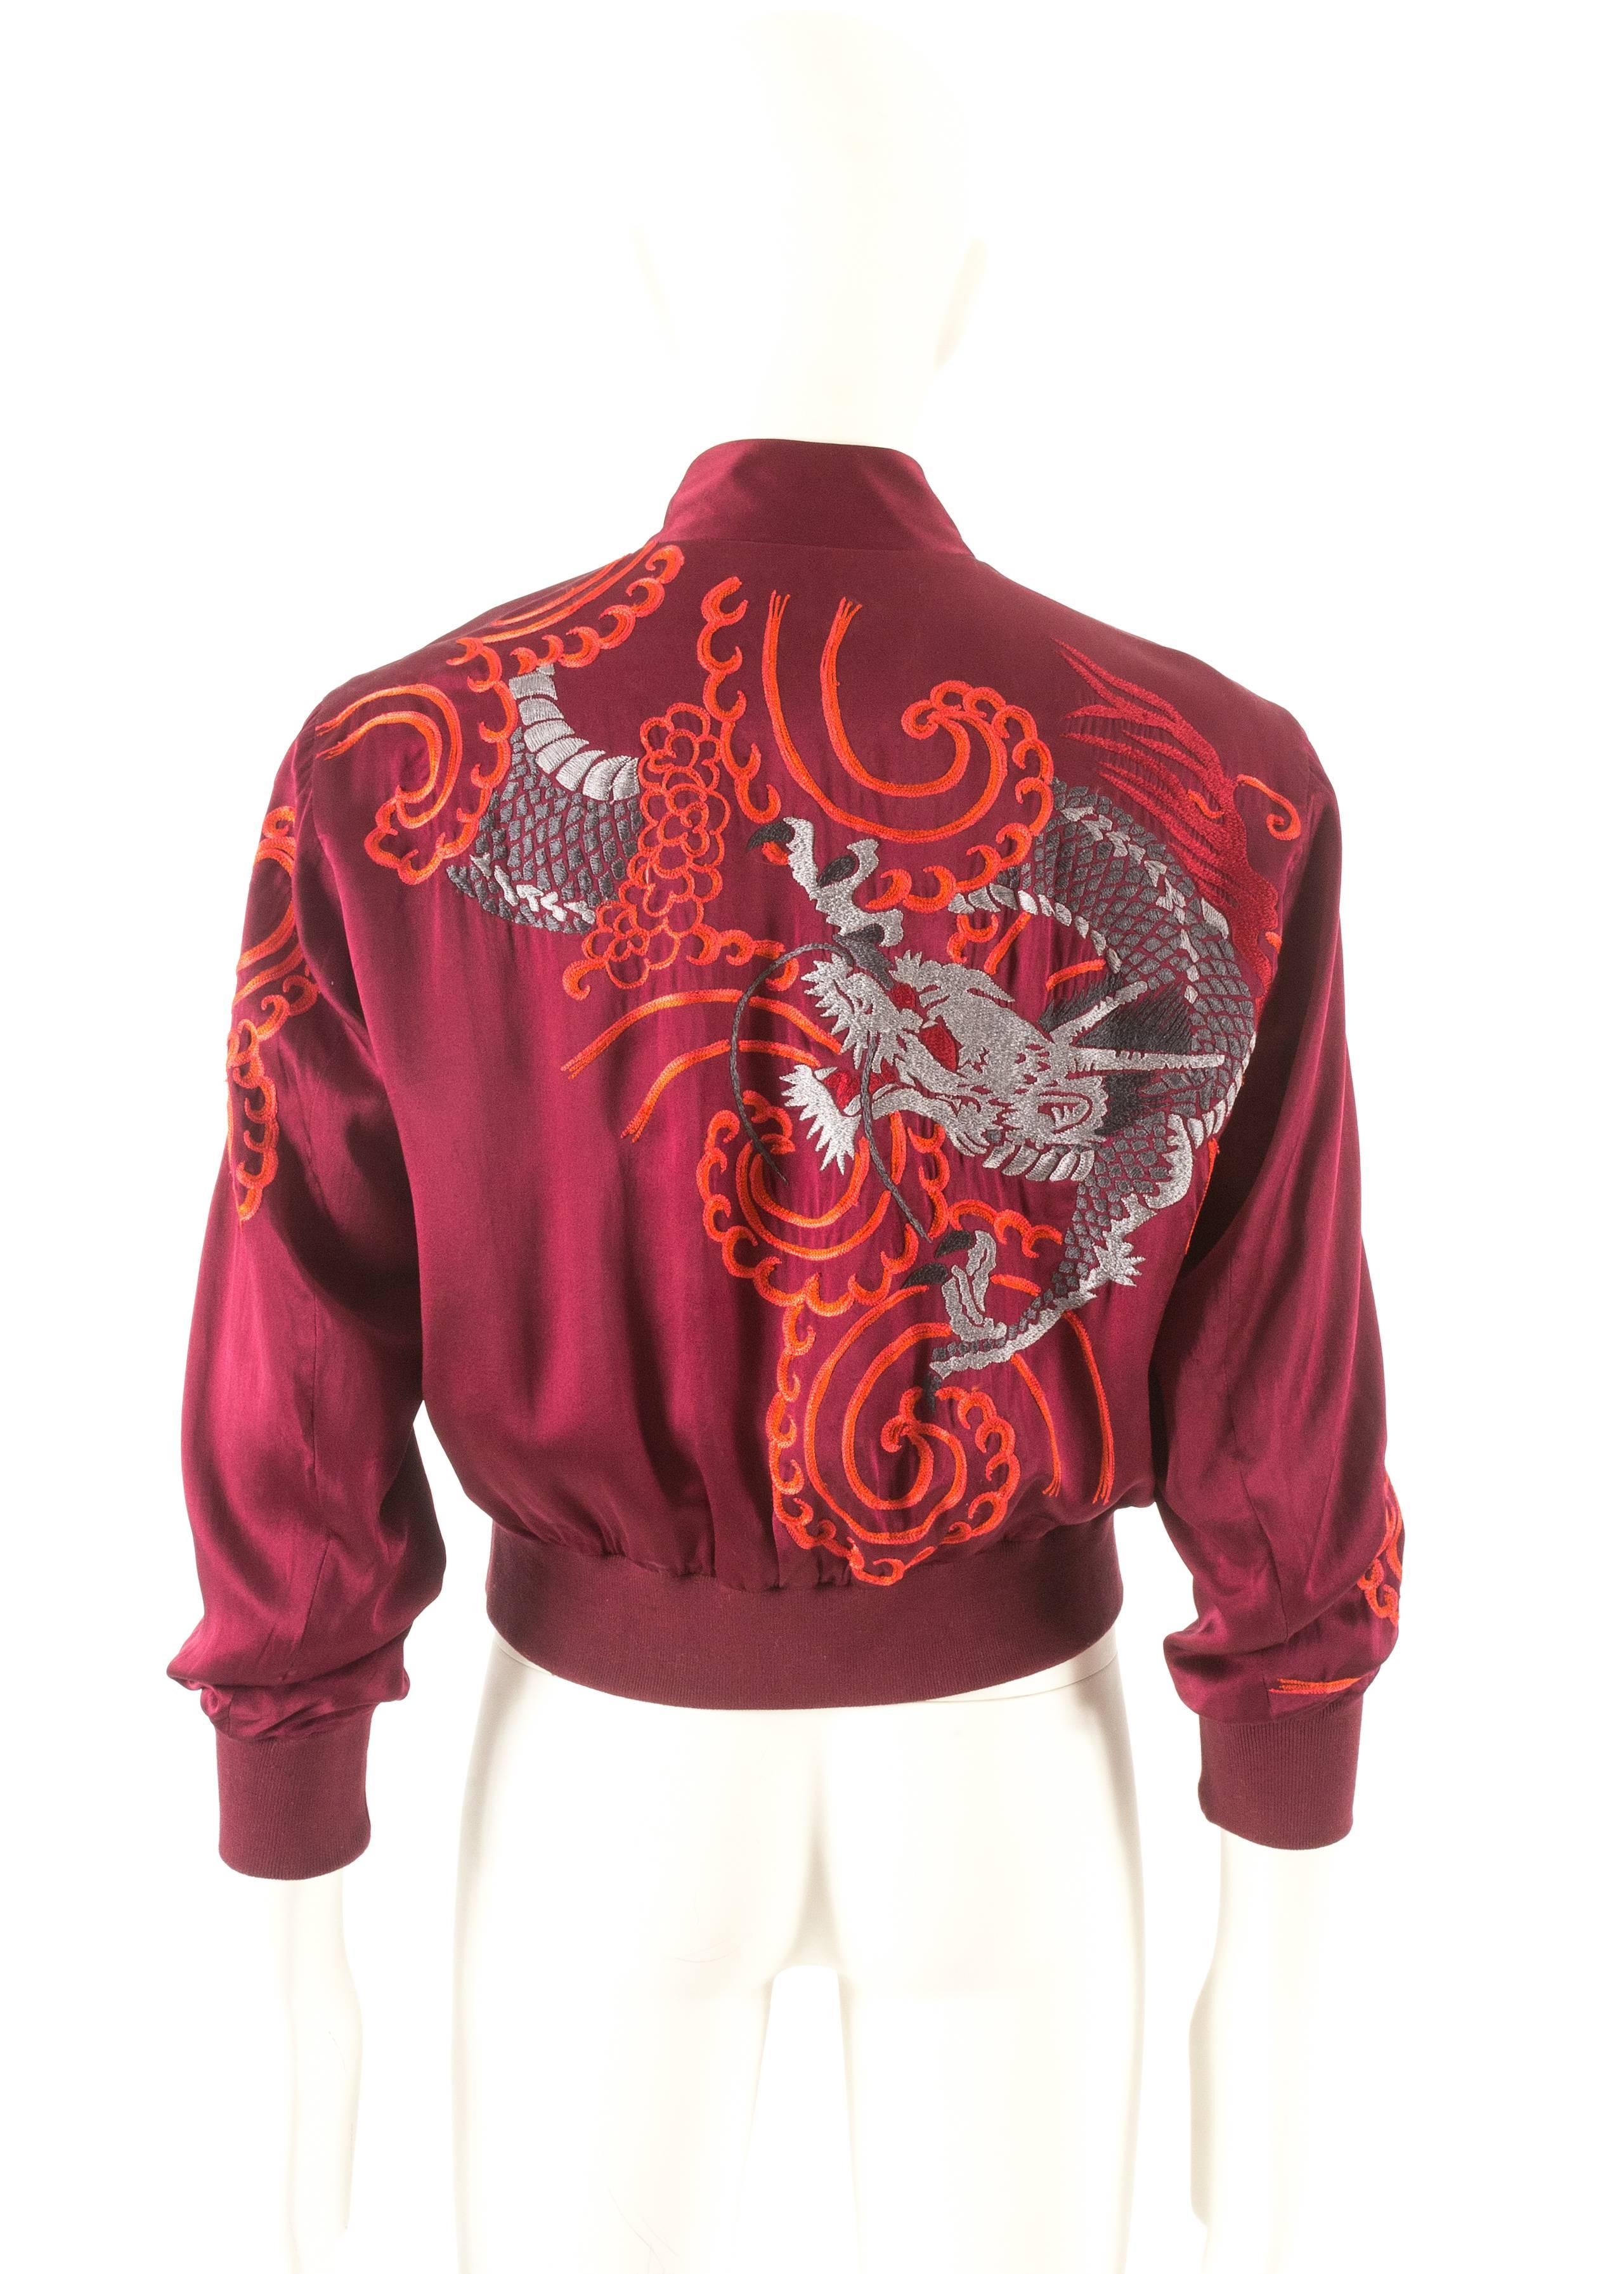 Tom Ford for Gucci unisex reversible embroidered silk jacket, Spring-Summer 2001 1